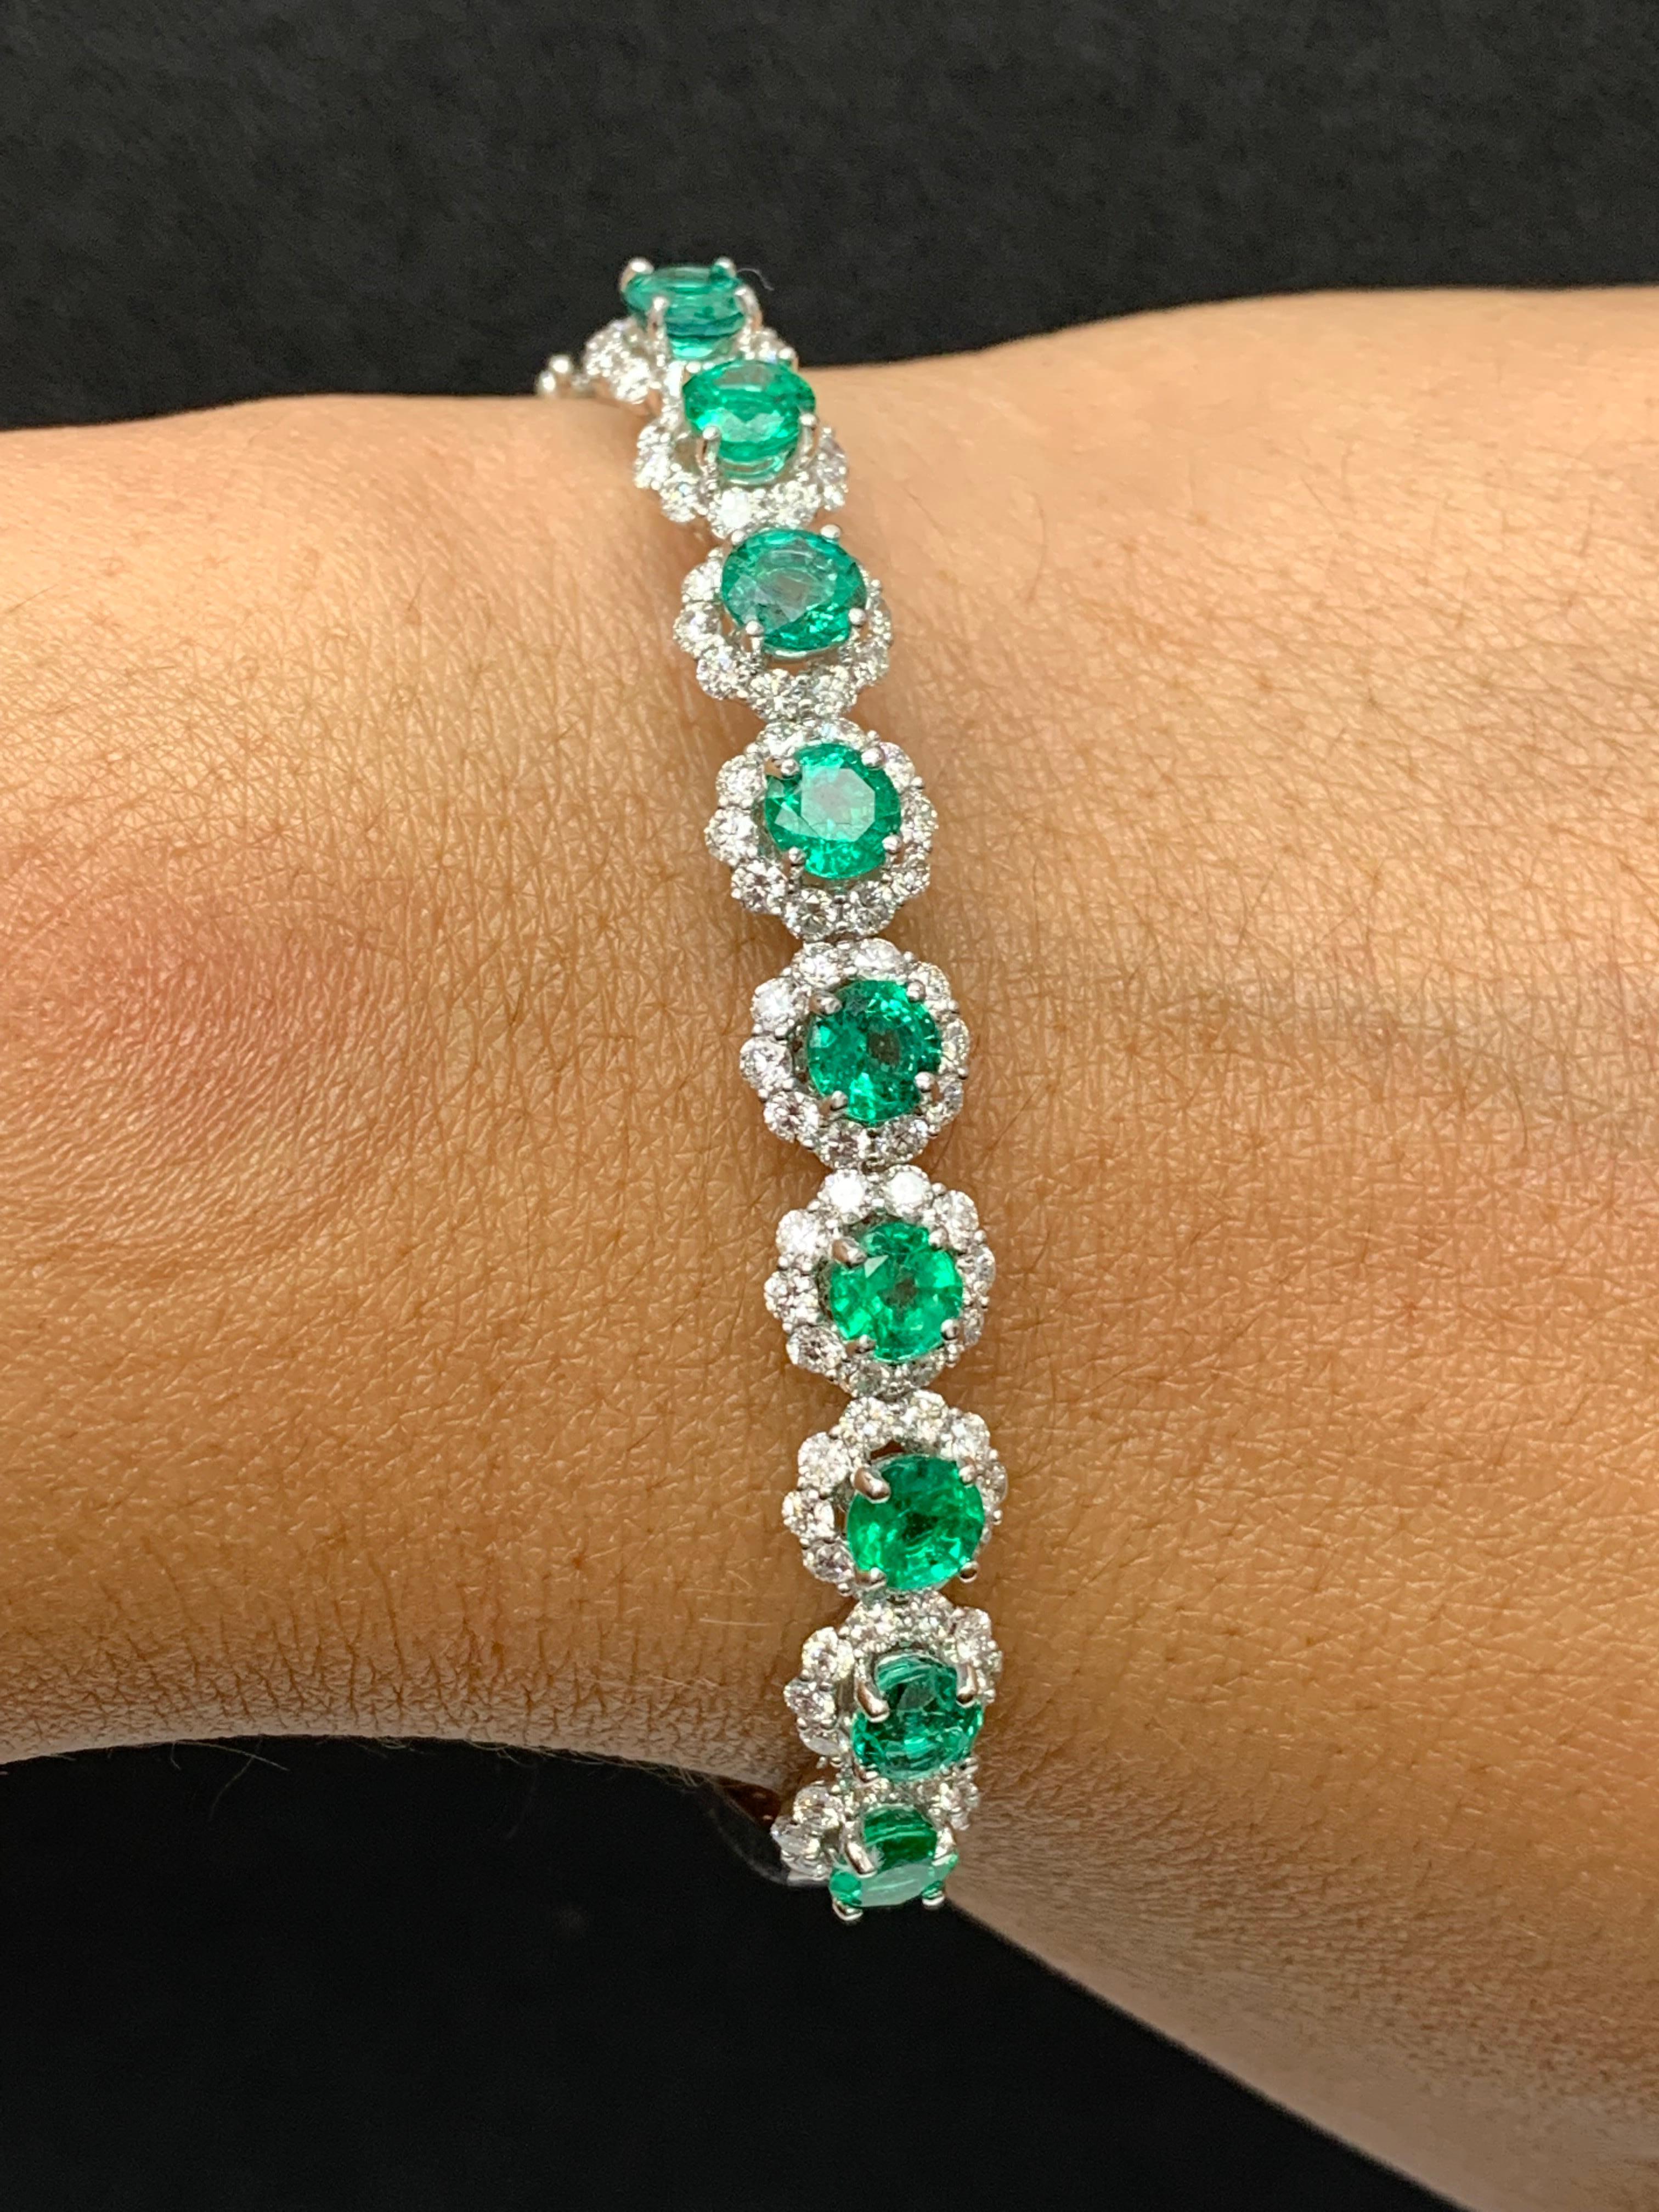 Sparkle in the spotlight with this brilliant cut emerald and diamond bangle bracelet. Features 9 brilliant-cut round emeralds weighing 3.97 carats and surrounding the emeralds are 90 diamonds weighing 2.45 carats elegantly set in an 18k white gold